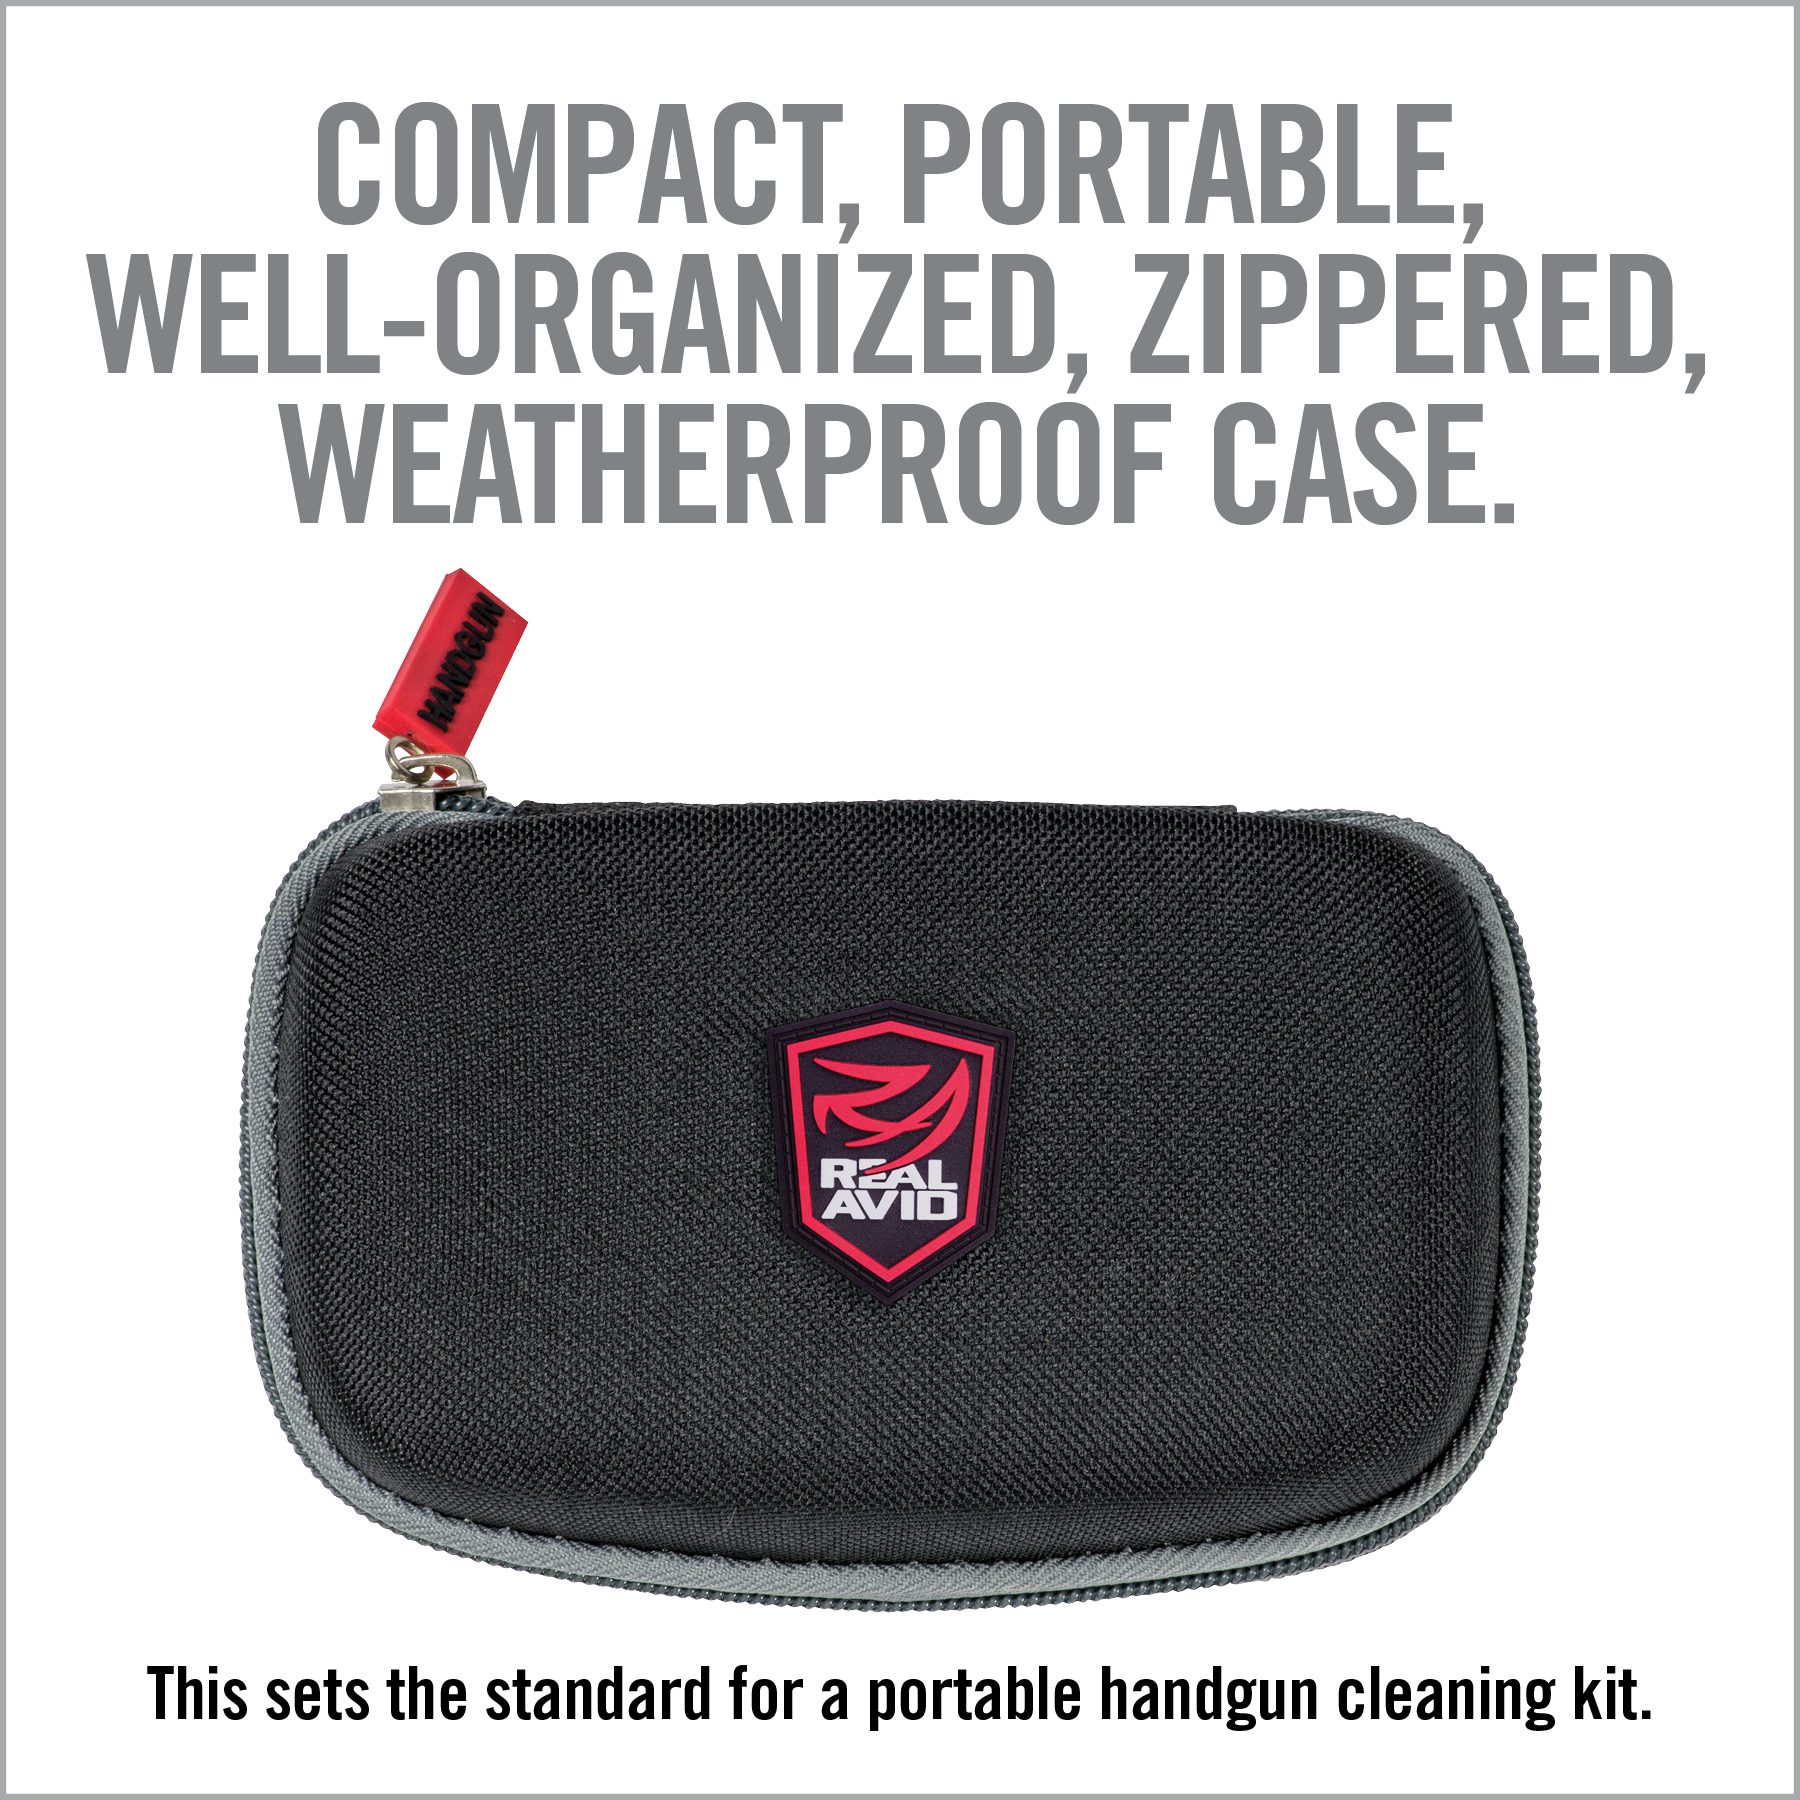 an advertisement with a red and black logo on it